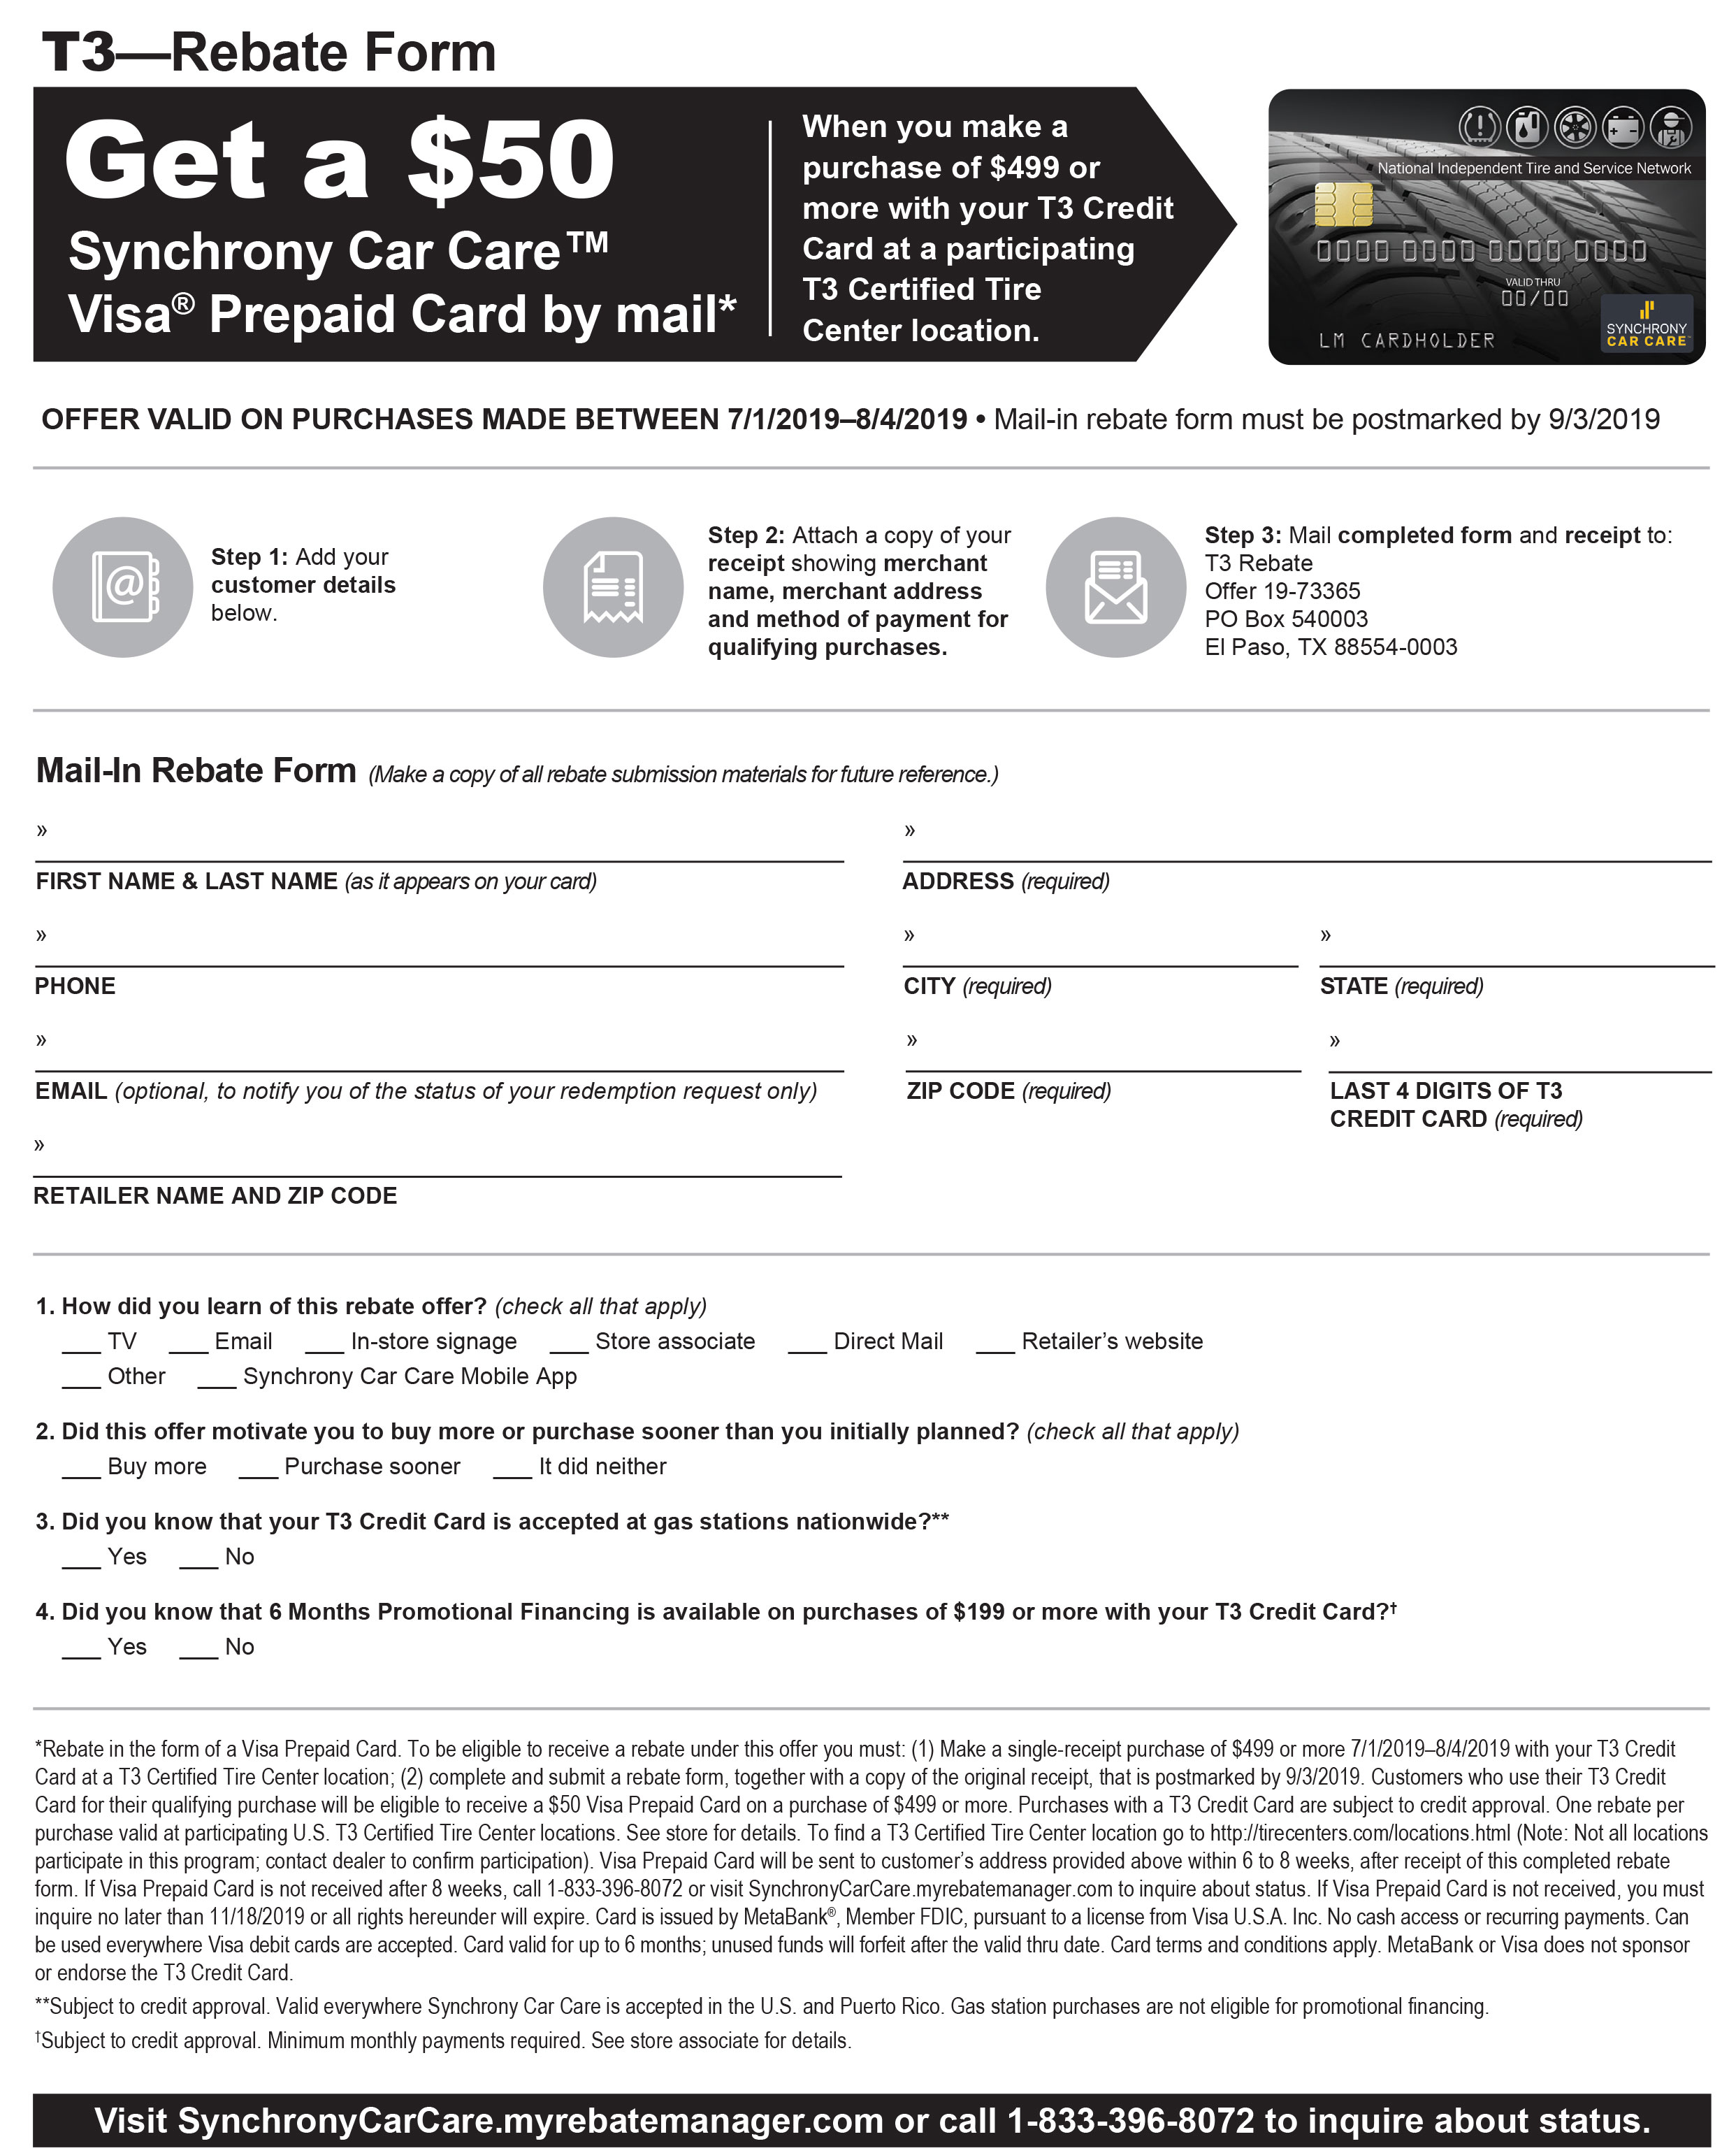 Synchrony Car Care My Rebate Manager